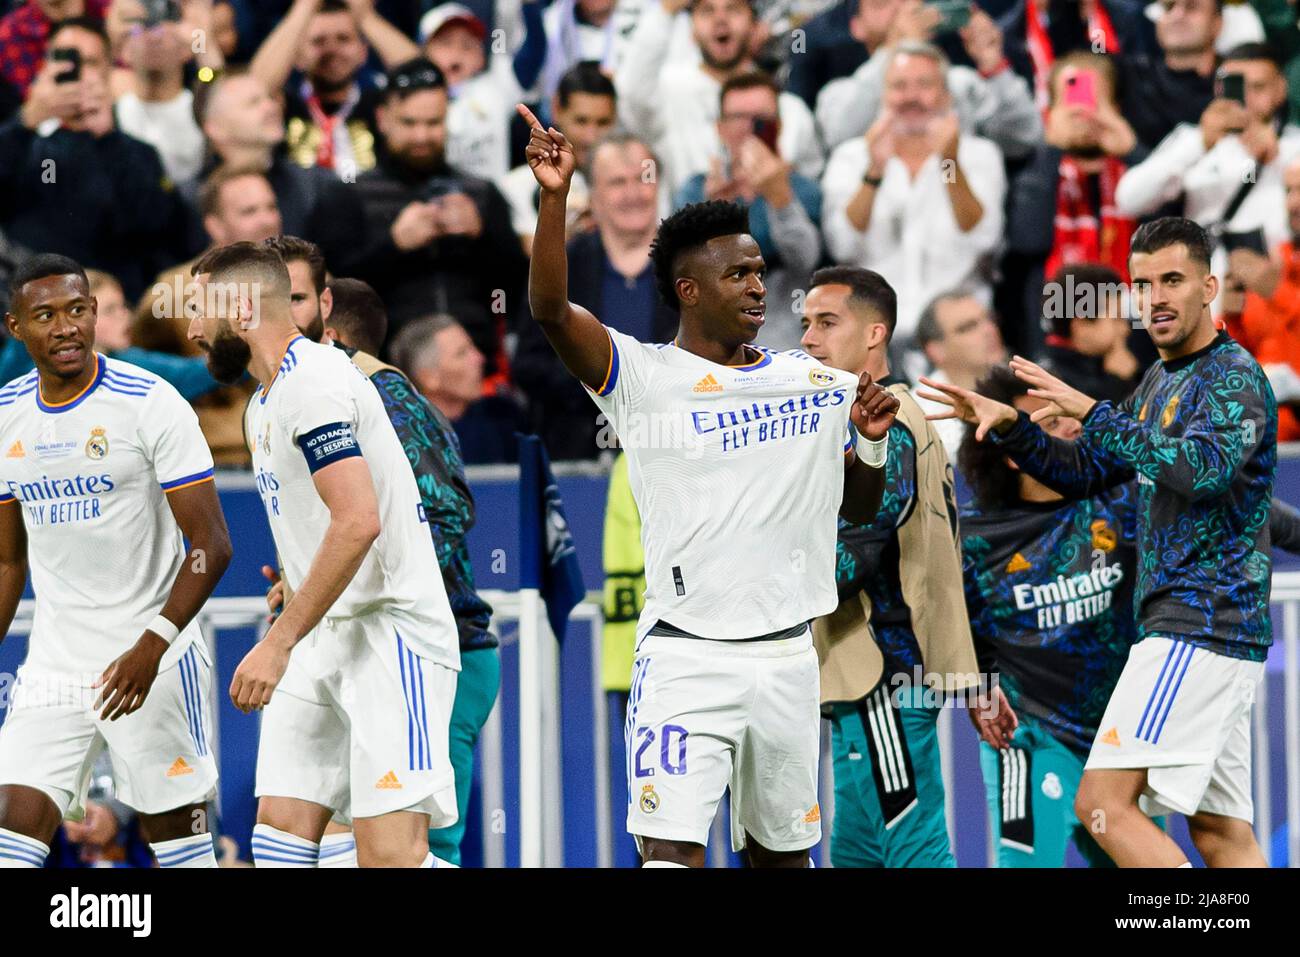 Paris, France - May 28: Vinicius Junior of Real Madrid CF (C) celebrating  his goal with his teammates during the UEFA Champions League final match  between Liverpool FC and Real Madrid at